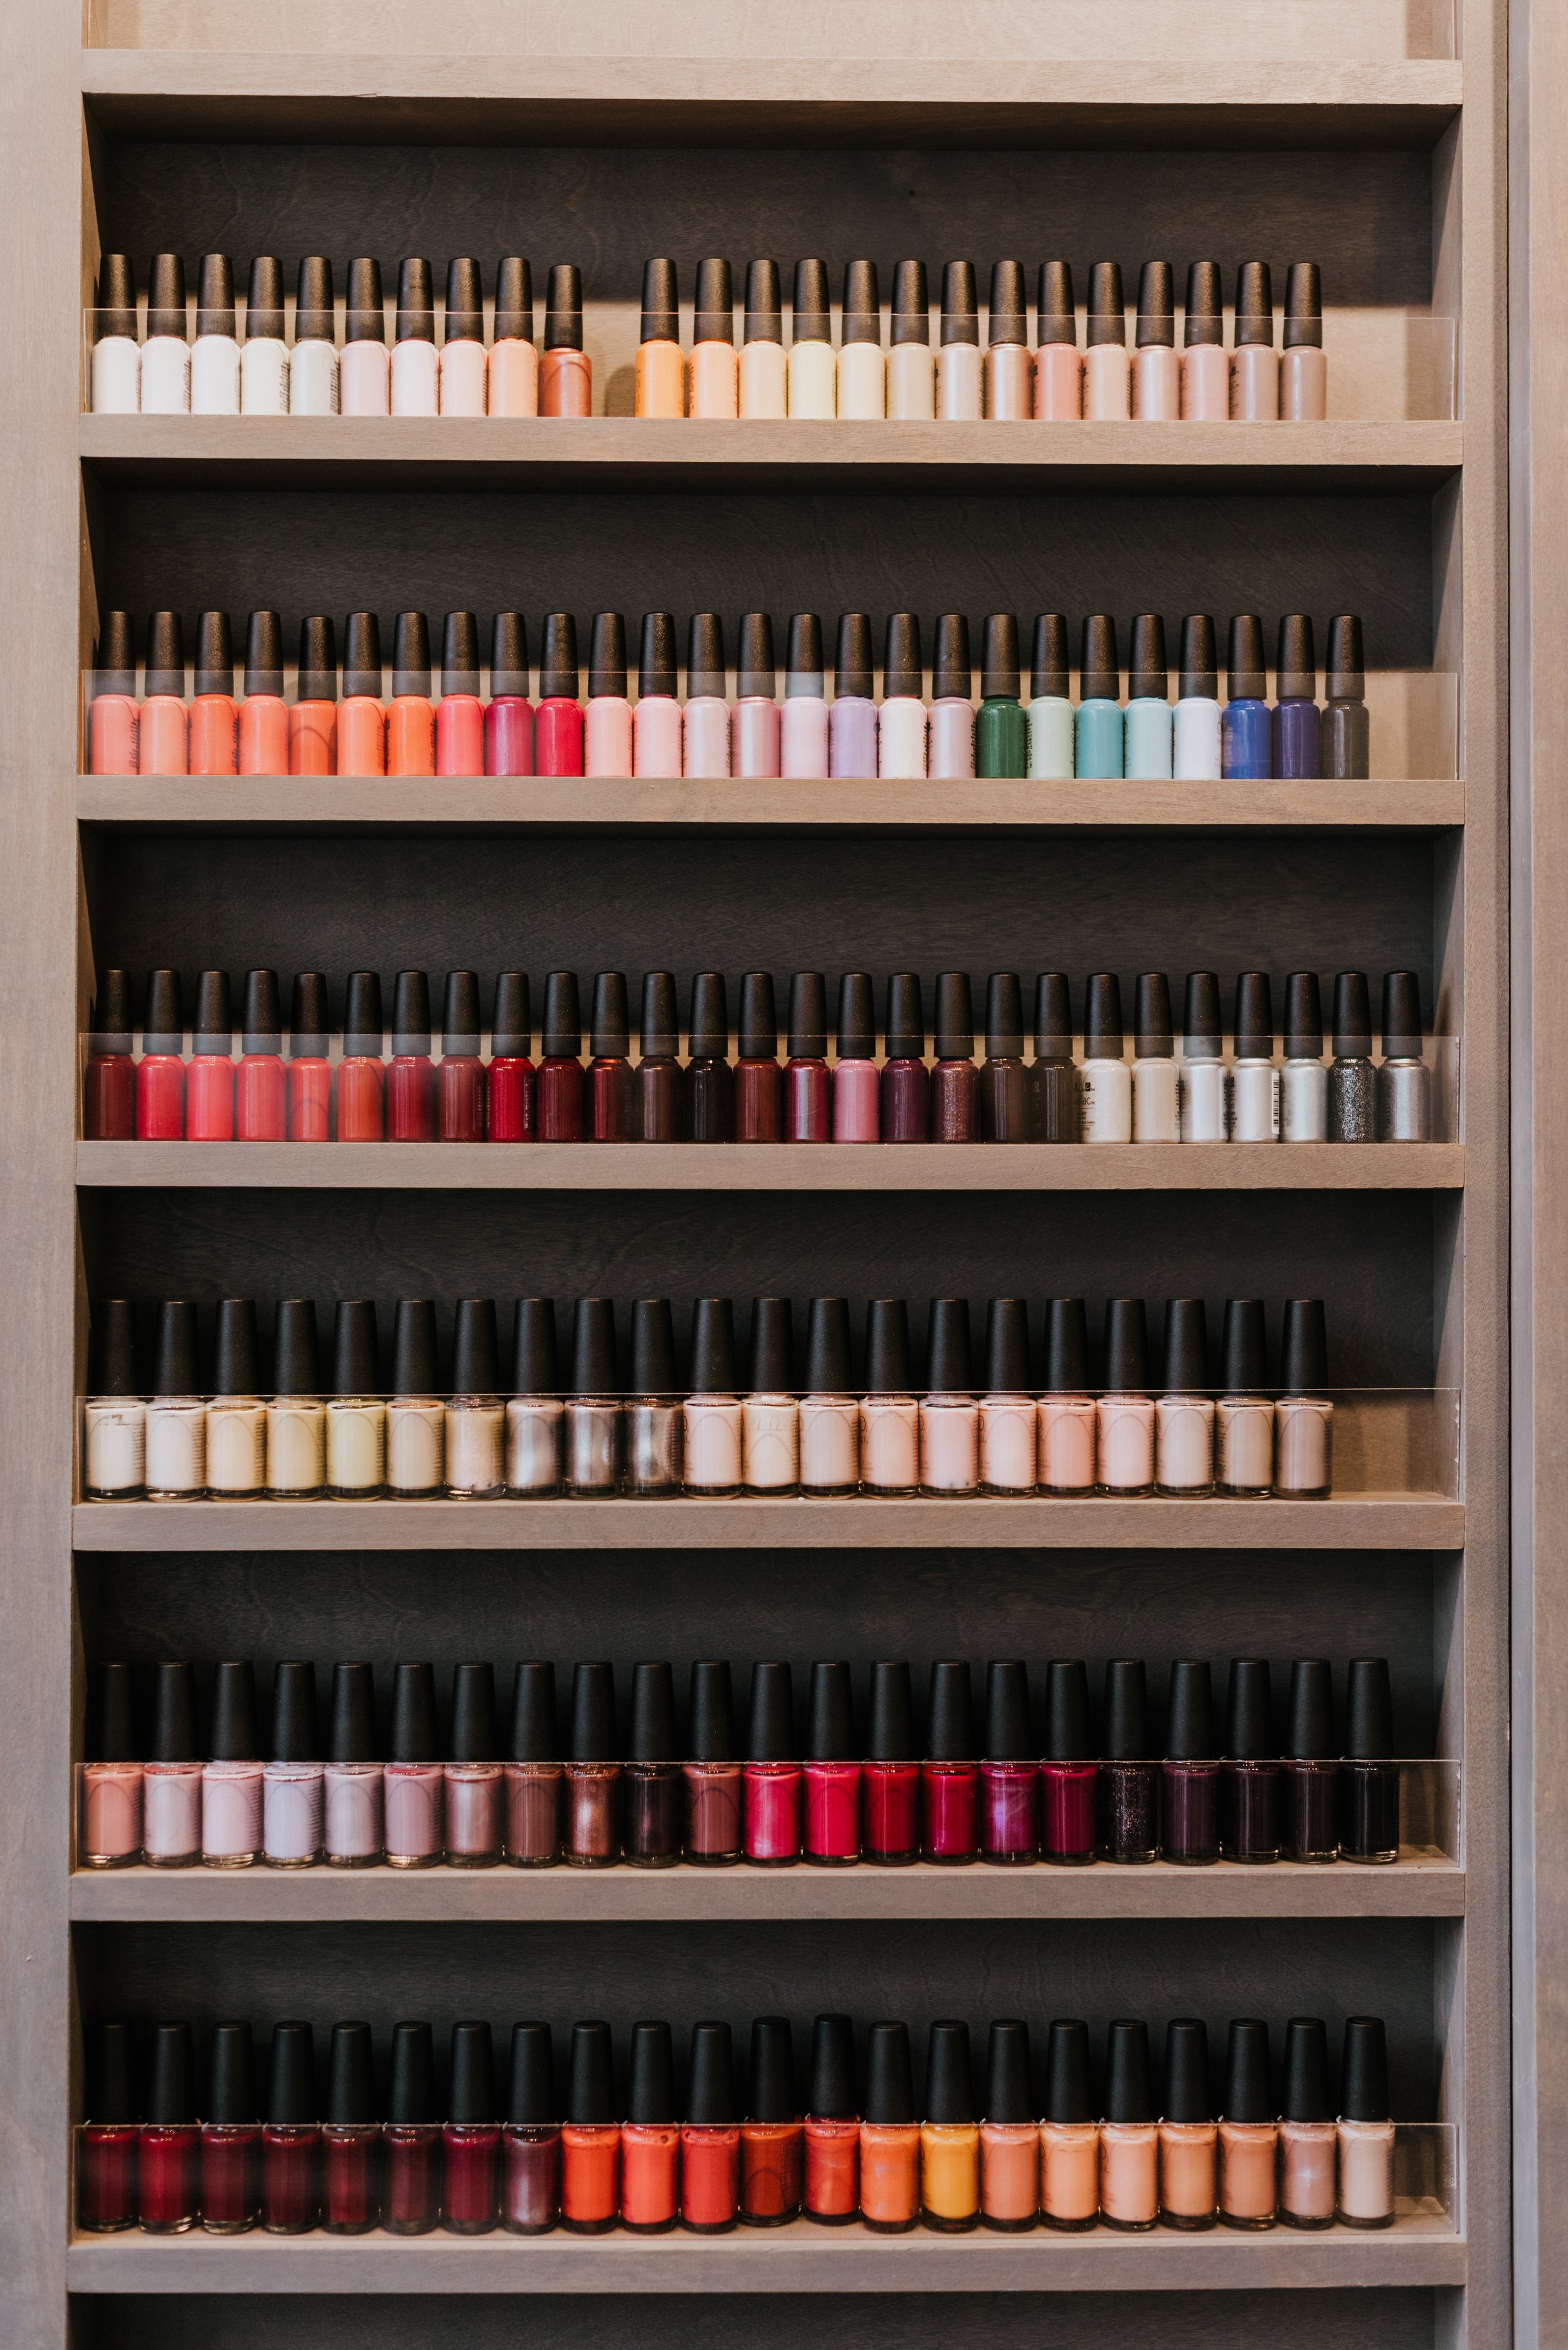 Finding the One: Review of The Ten Spot Beauty Bar – On the Danforth